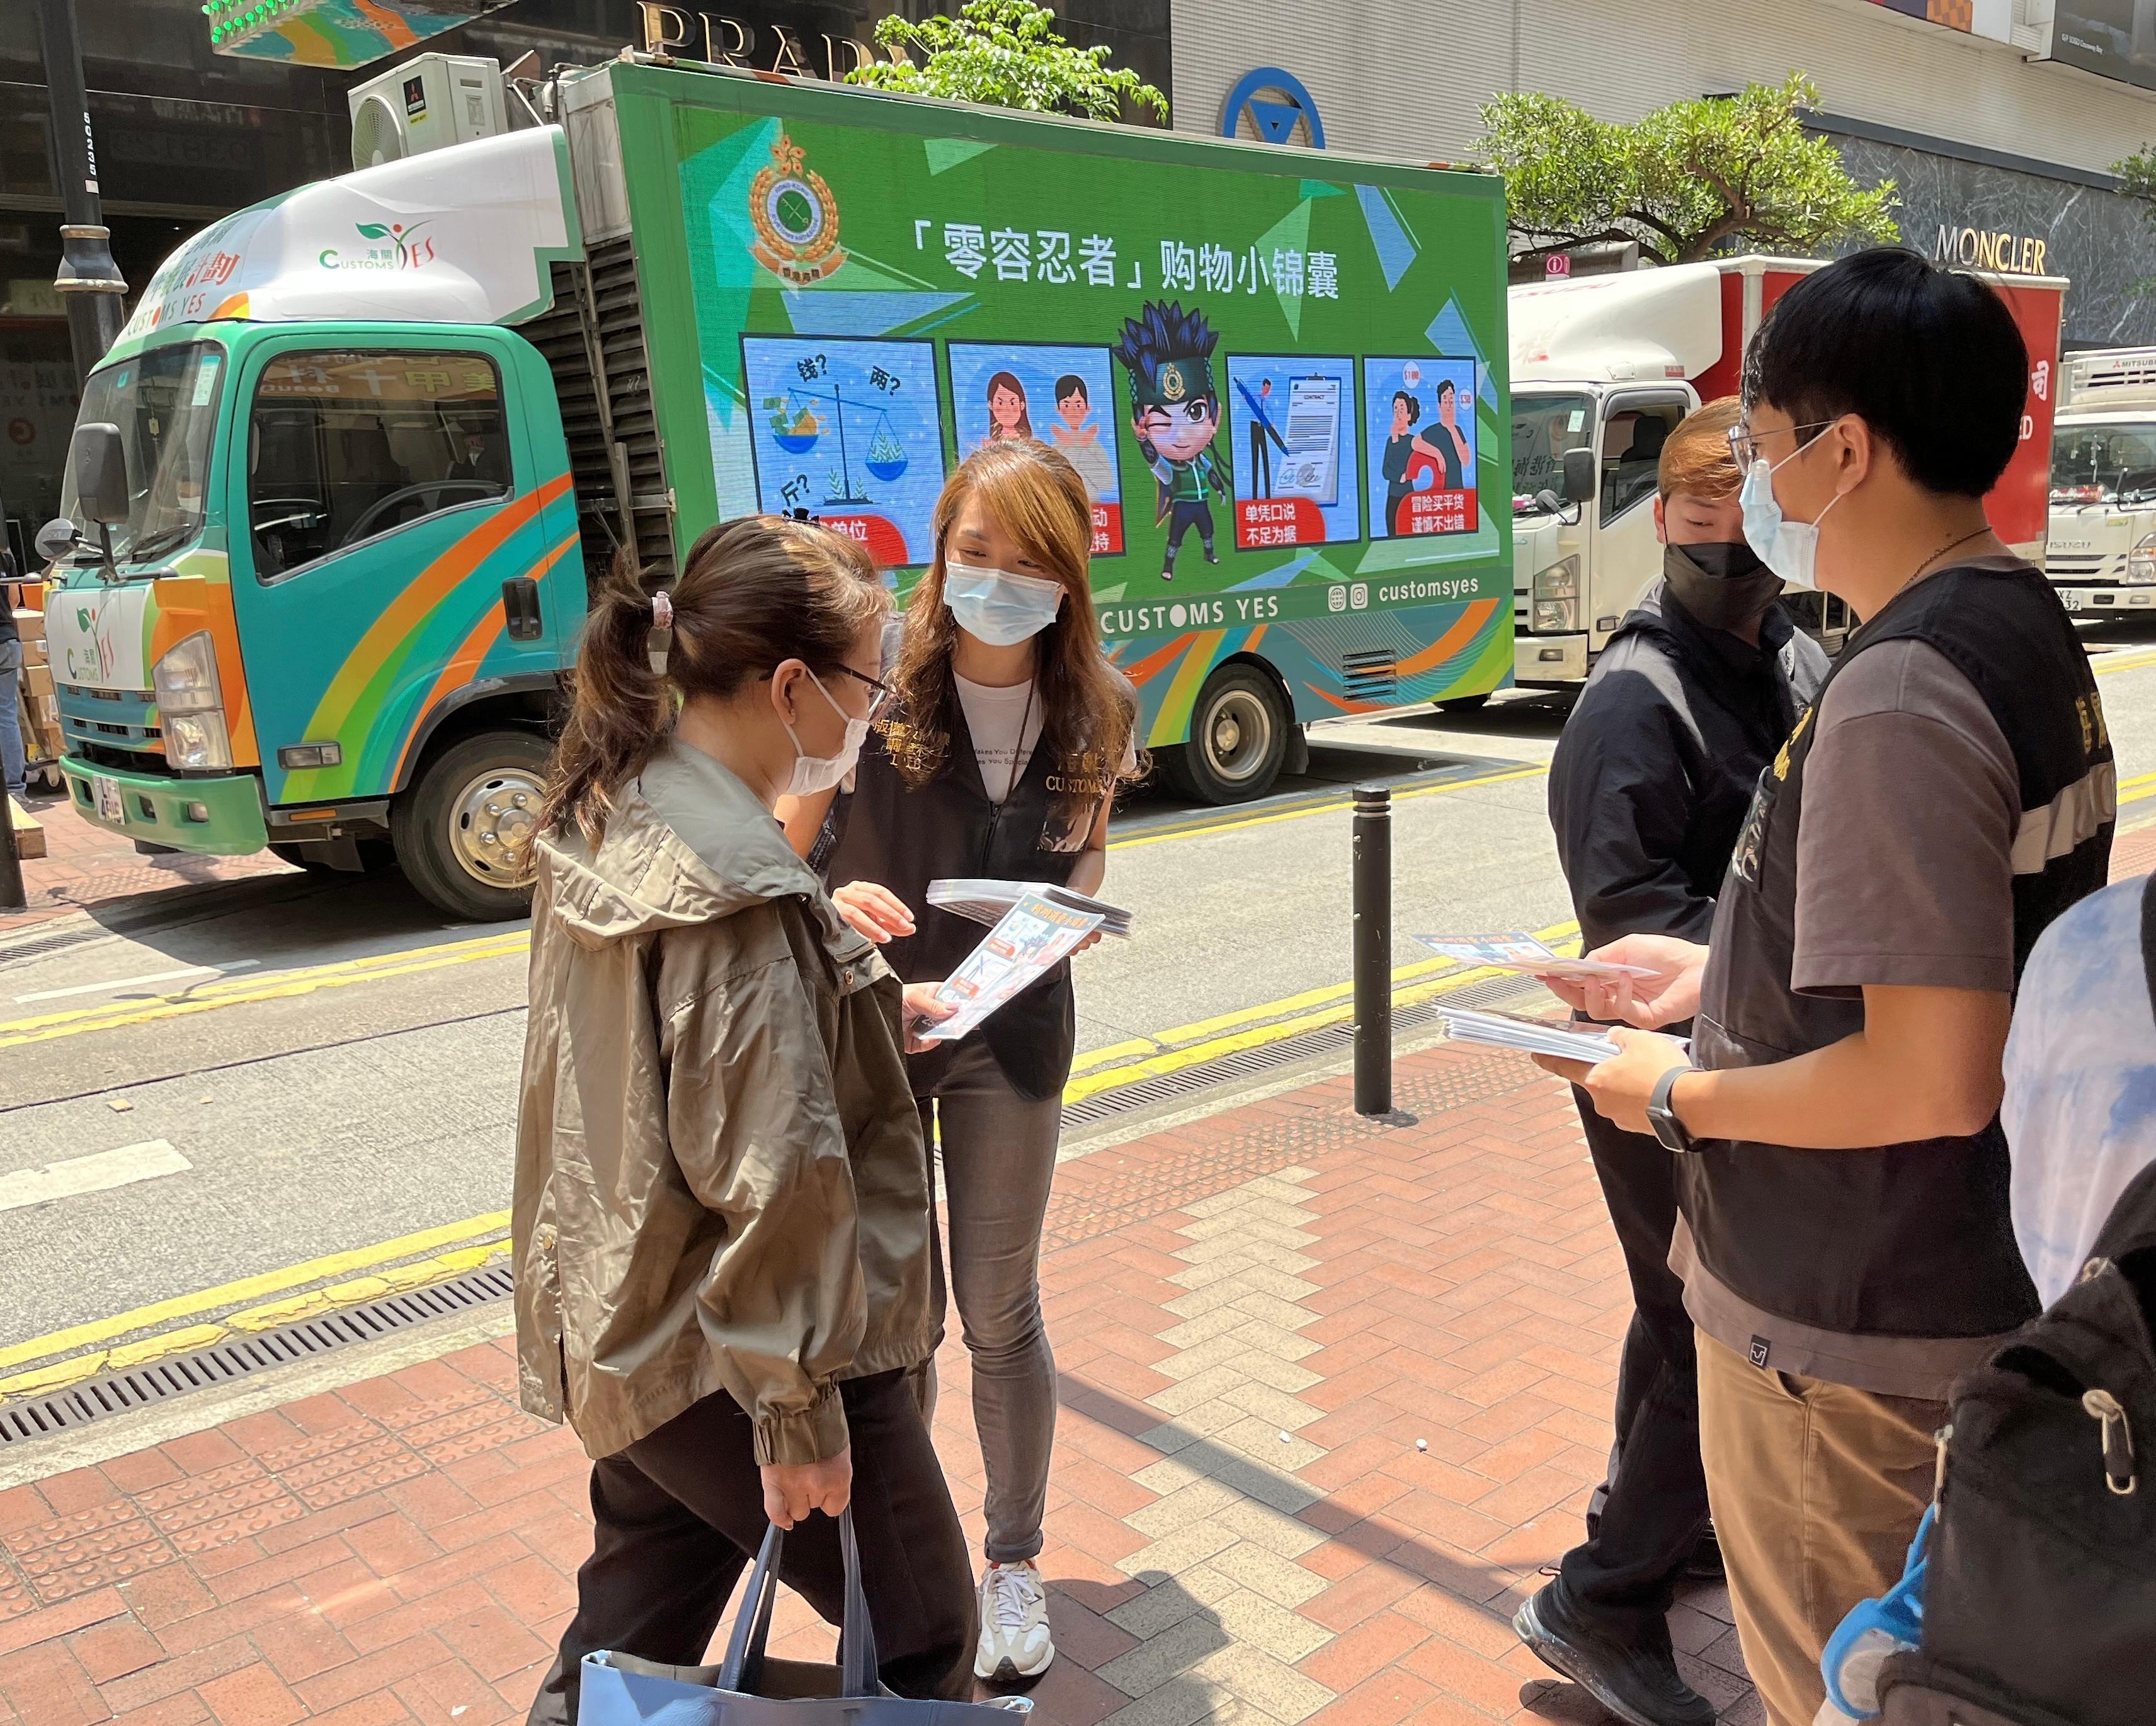 Hong Kong Customs launched an operation codenamed "Felicity" today (April 28) to step up patrols during the Labour Day Golden Week period at popular shopping spots in various districts and to remind traders to comply with the requirements of the Trade Descriptions Ordinance, with a view to safeguarding rights of local consumers and visitors. Photo shows Customs officers distributing pamphlets in Causeway Bay.